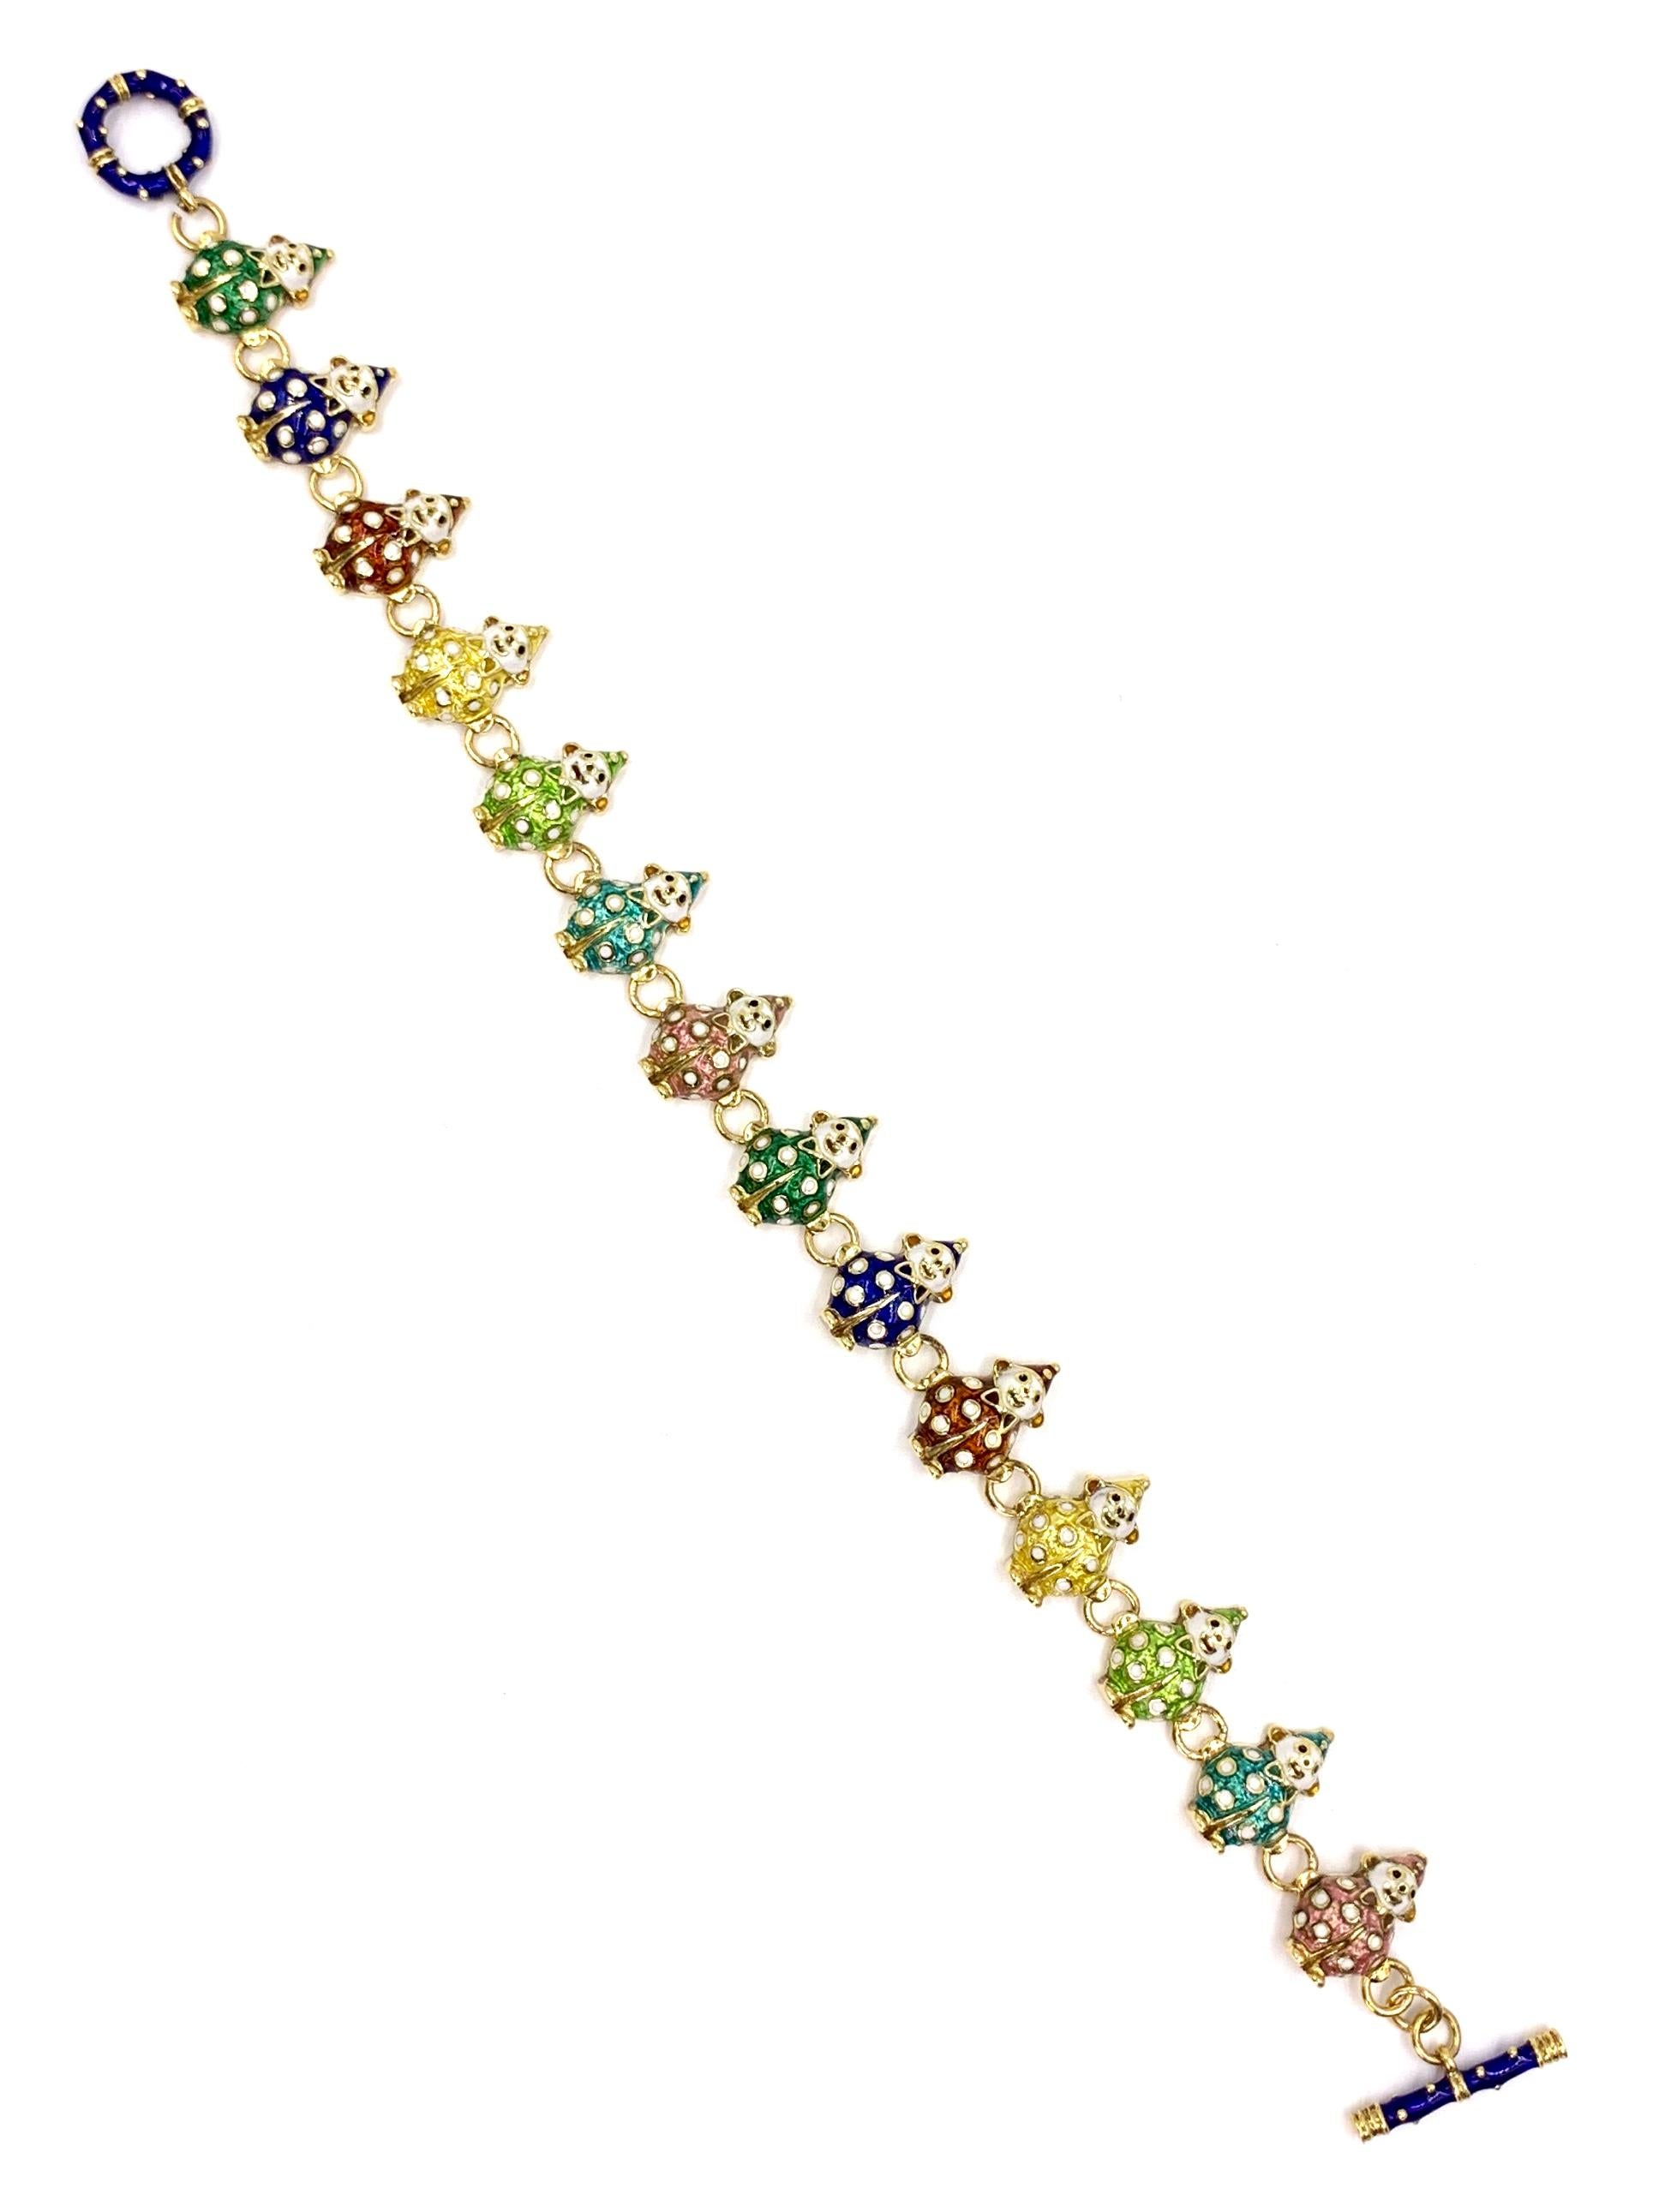 Made by expert enamel fine jewelry designer, HIDALGO. This heavy 18 karat yellow gold toggle clasp bracelet features 14 adorable clown links, each with a hand painted suit and matching hat, colors include: golden yellow, forest green, royal blue,